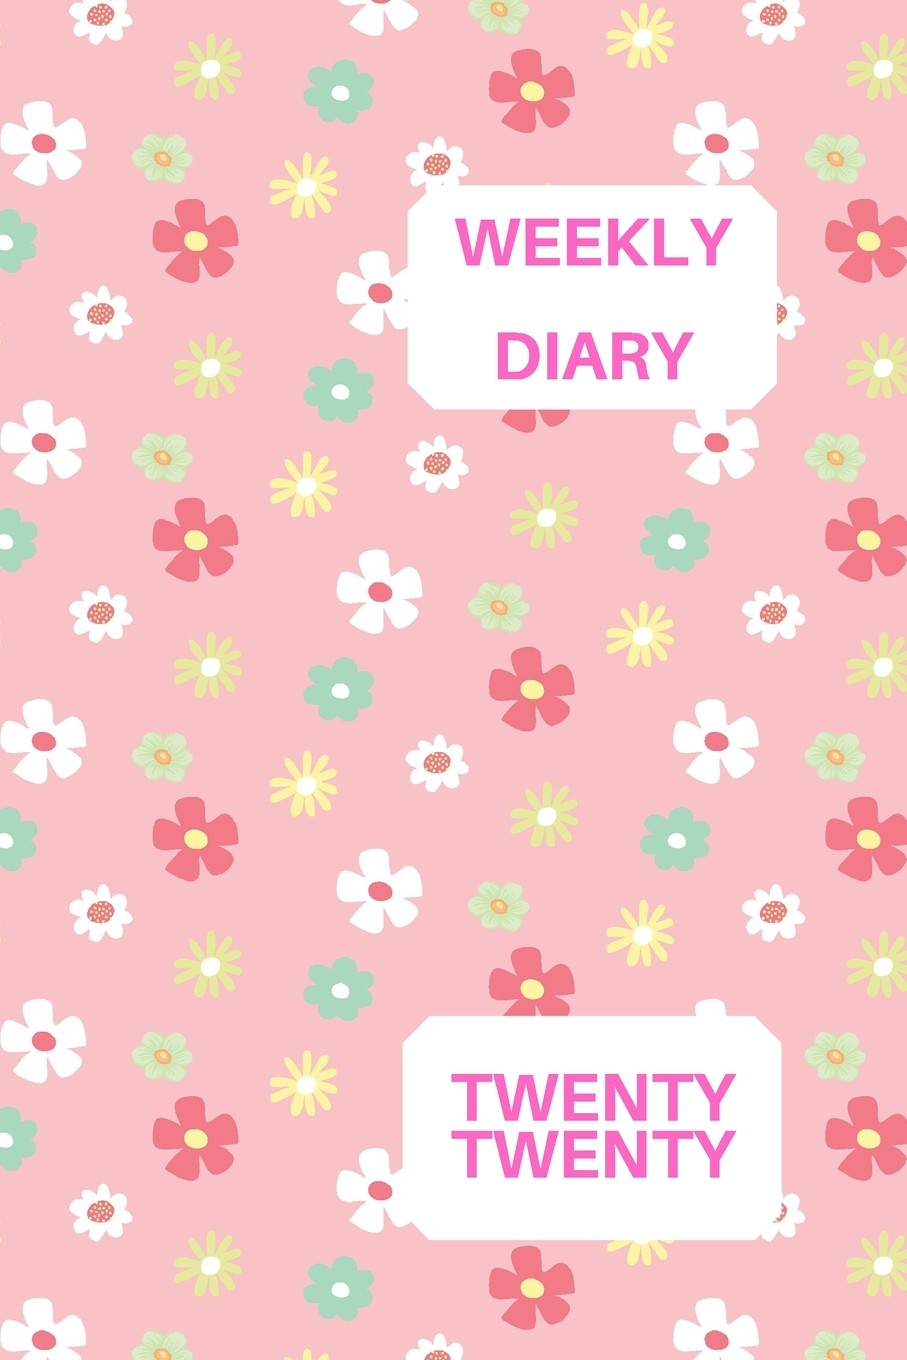 Weekly Diary Twenty twenty: 6x9 week to a page 2020 diary planner. 12 months monthly planner, weekly diary & lined paper note pages. Perfect for teachers, students and small business owners. Cute pink - image 1 of 1